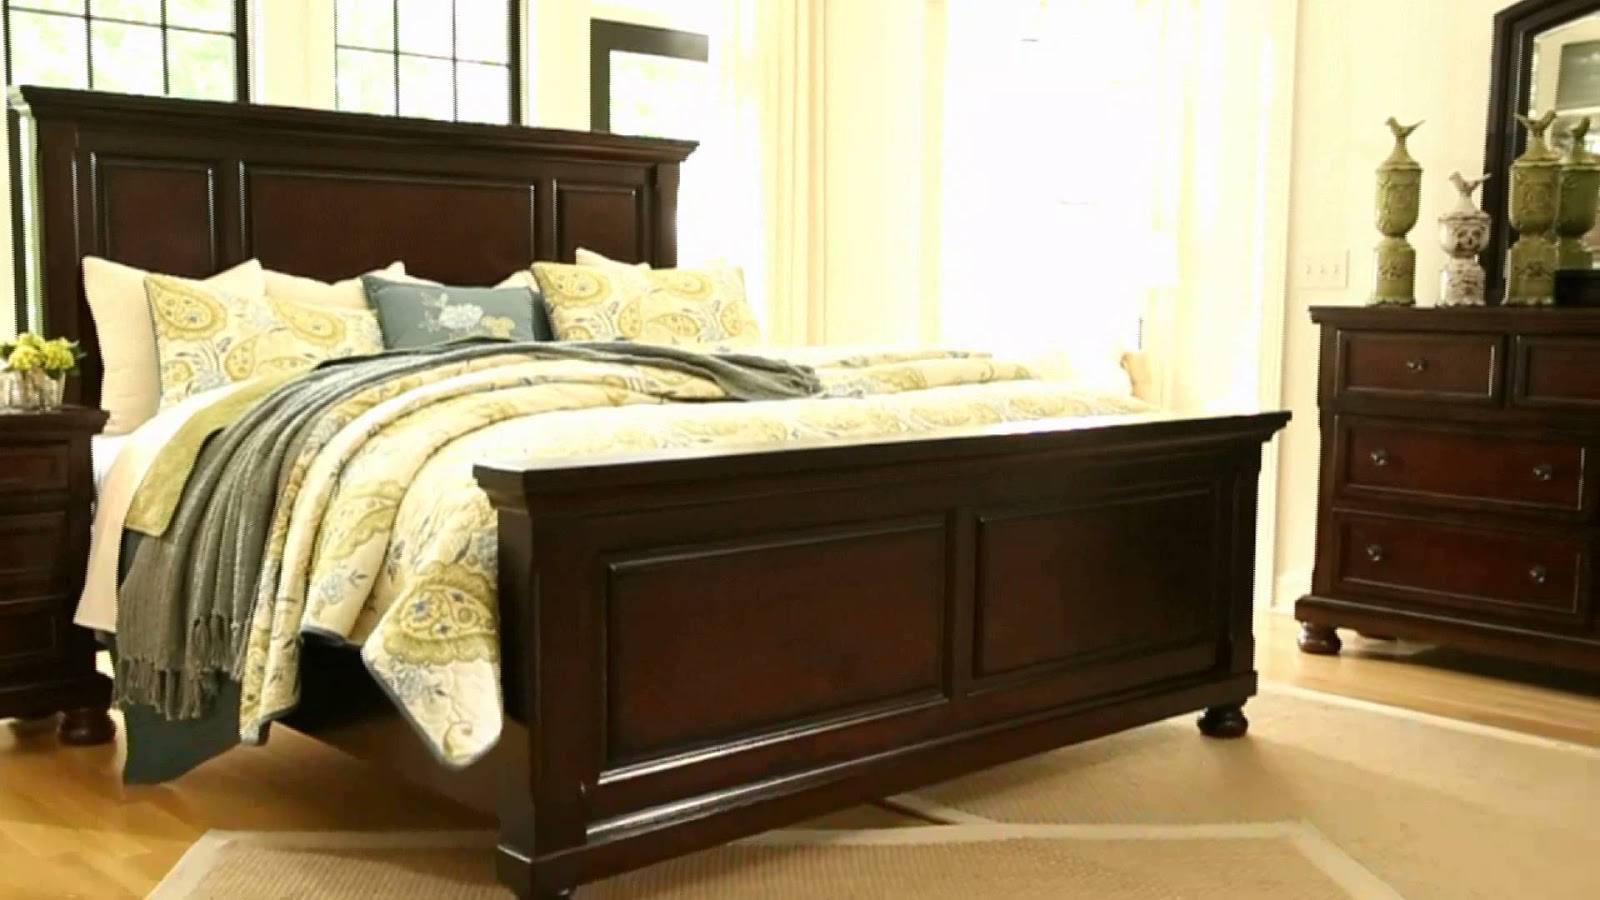 Best Of 89+ Captivating ashley furniture queen mattress and box spring You Won't Be Disappointed